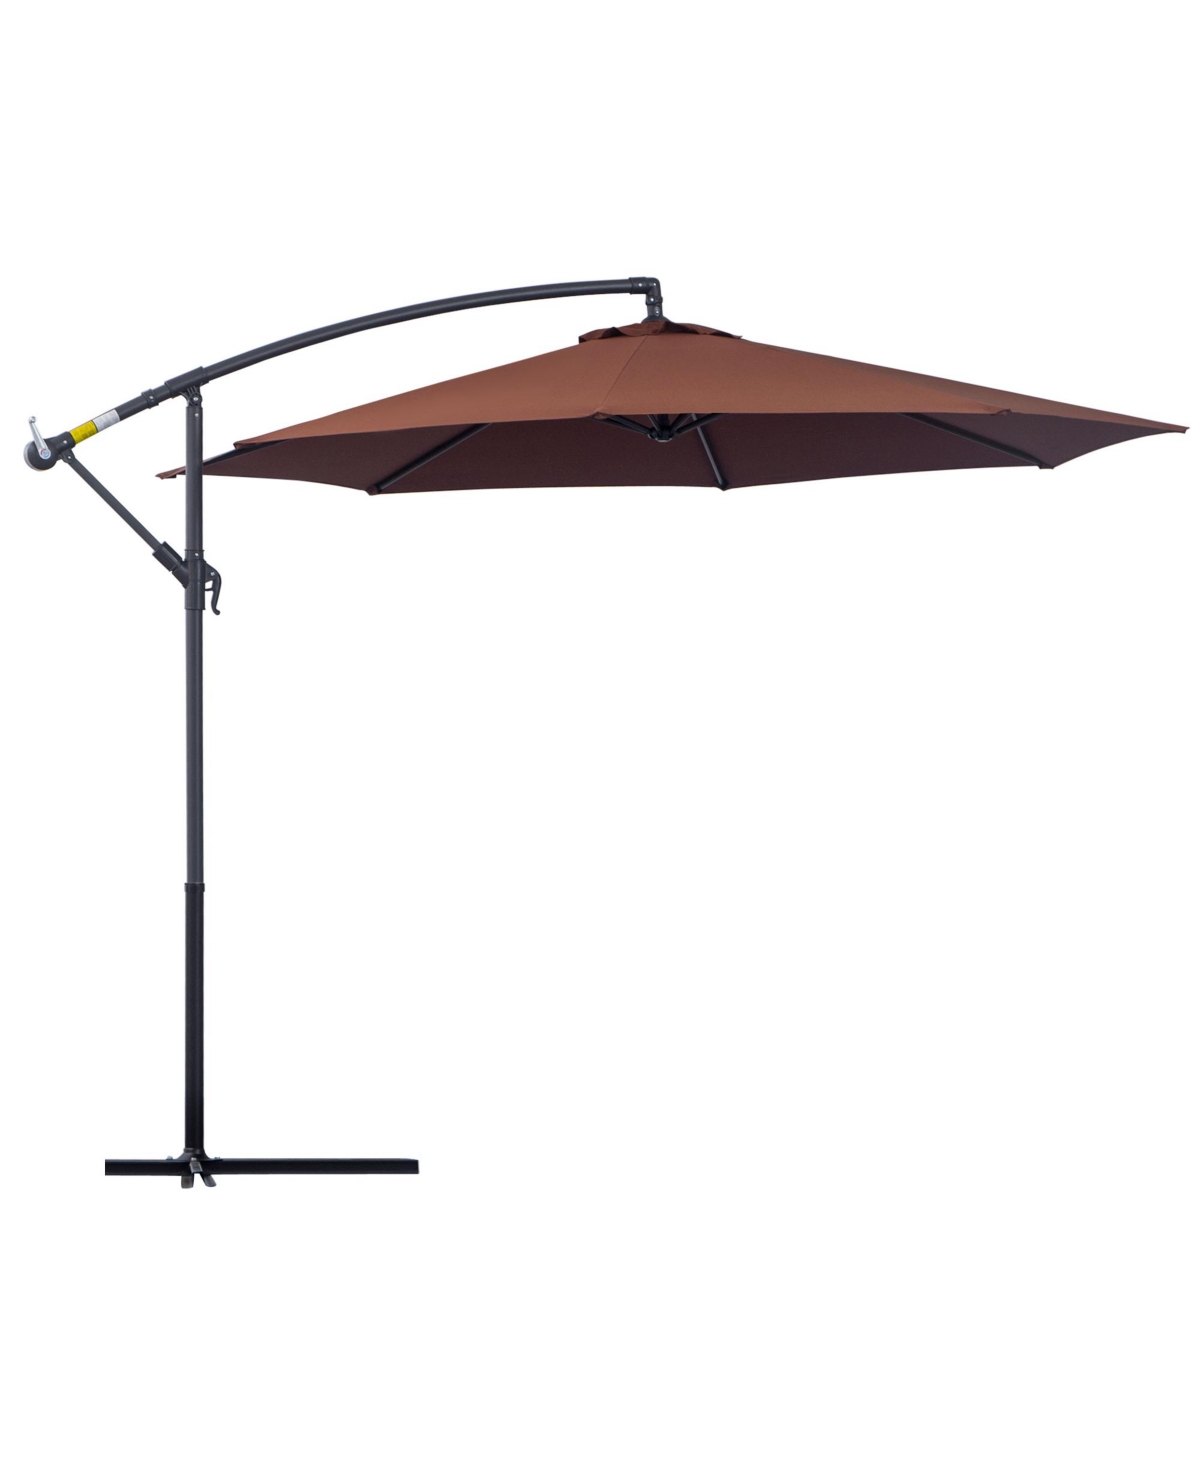 116.25" Cantilever Hanging Tilt Offset Patio Umbrella with Uv & Water Fighting Material and a Sturdy Stand, Brown - Brown